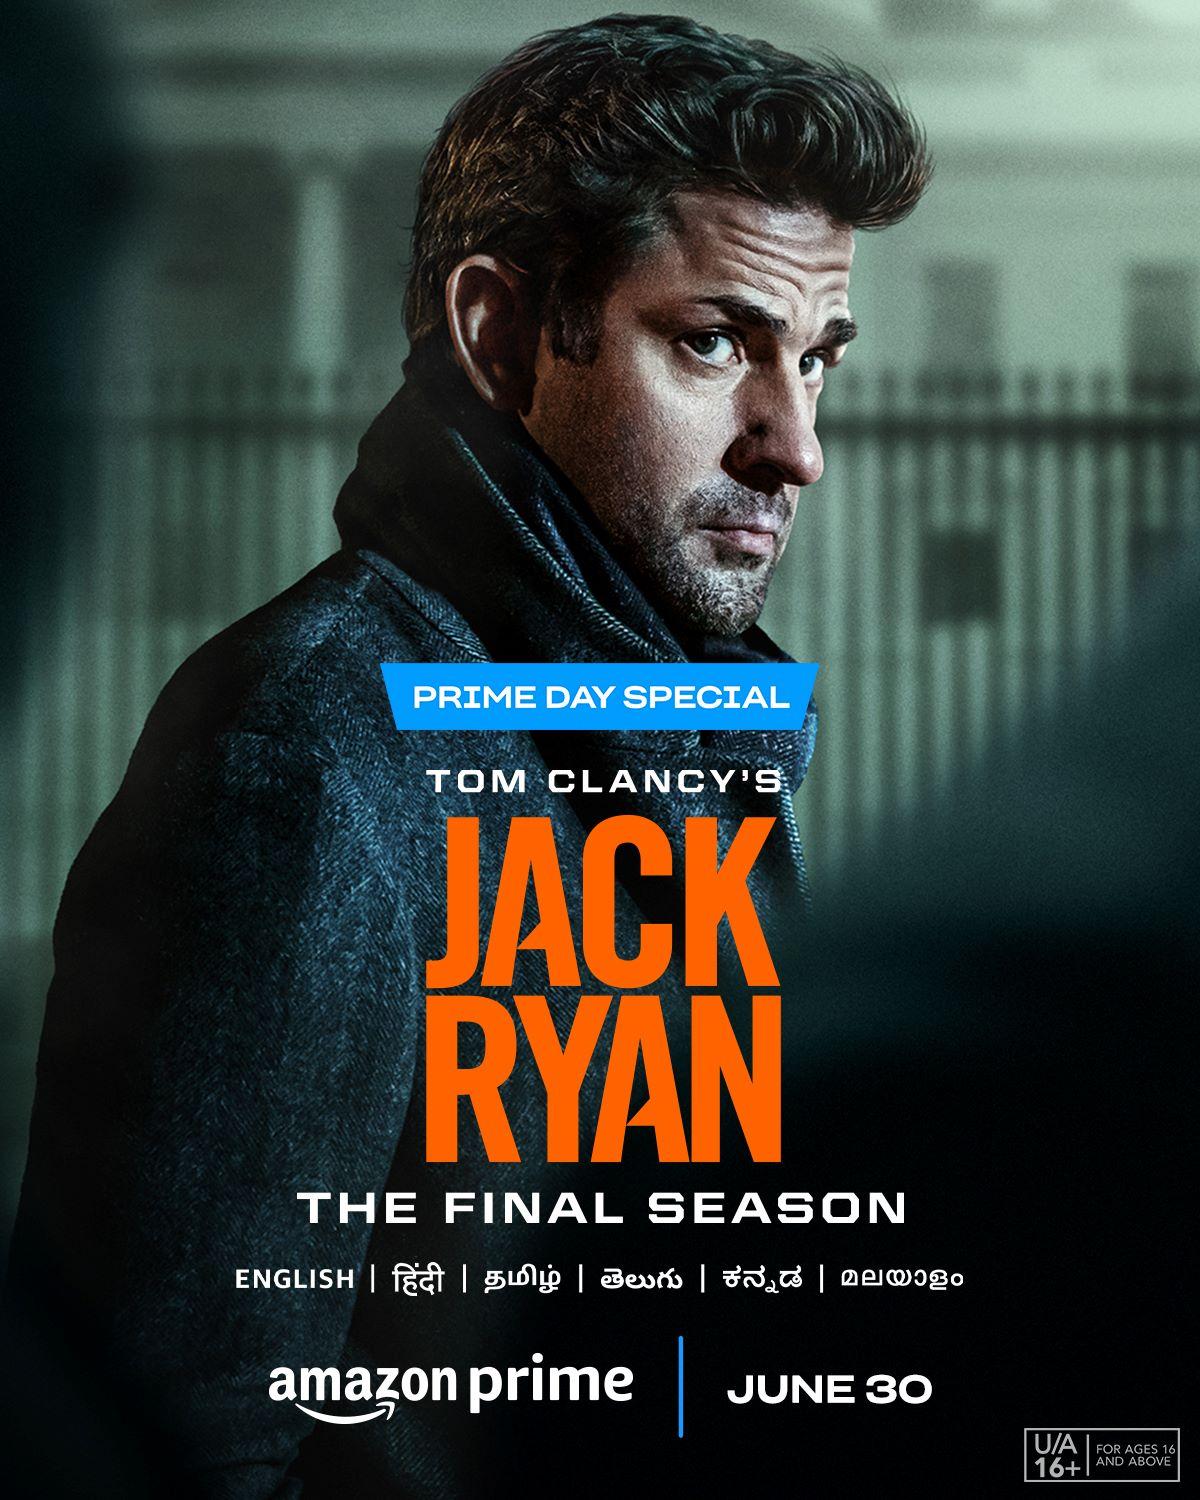 Jack Ryan returns to thrill for a final time on June 30th on Amazon Prime. Watch John Krasinski as Jack Ryan as he navigates new and bolder adventures